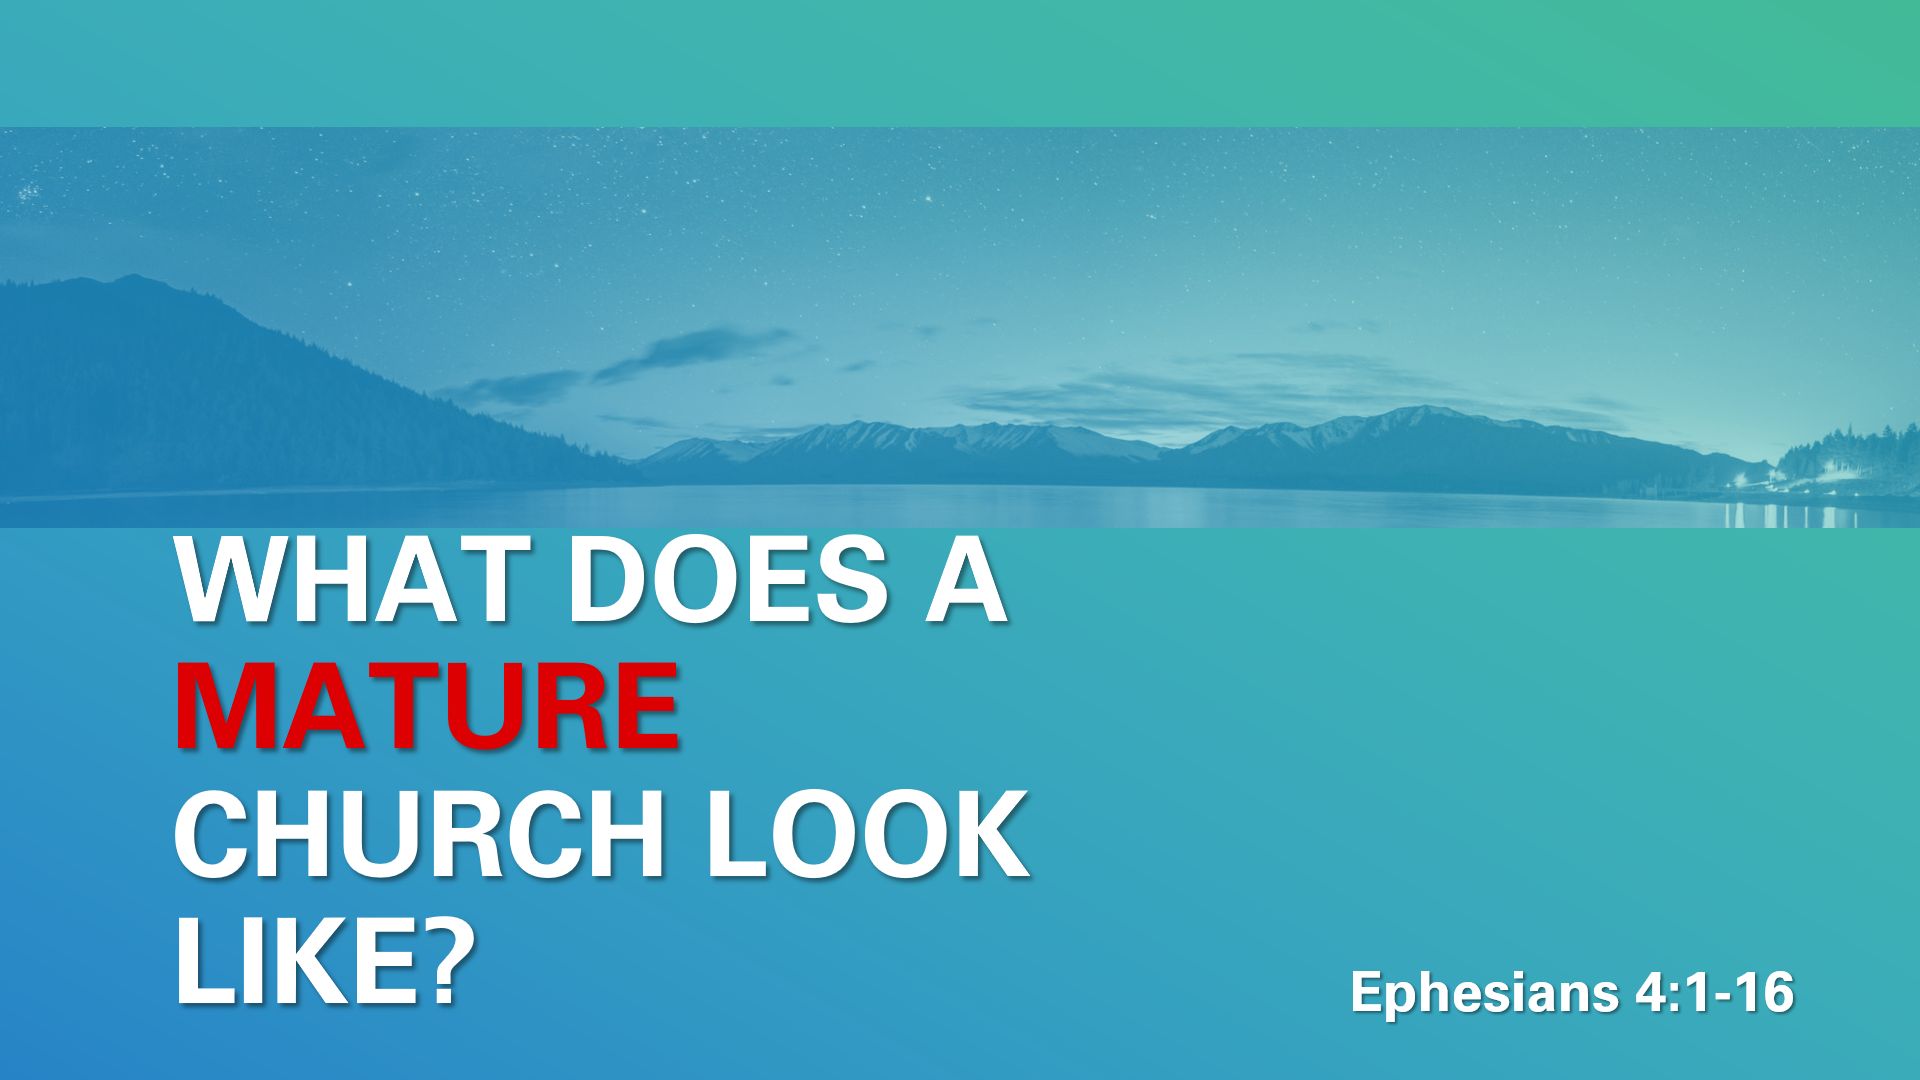 What Does a Mature Church Look Like?